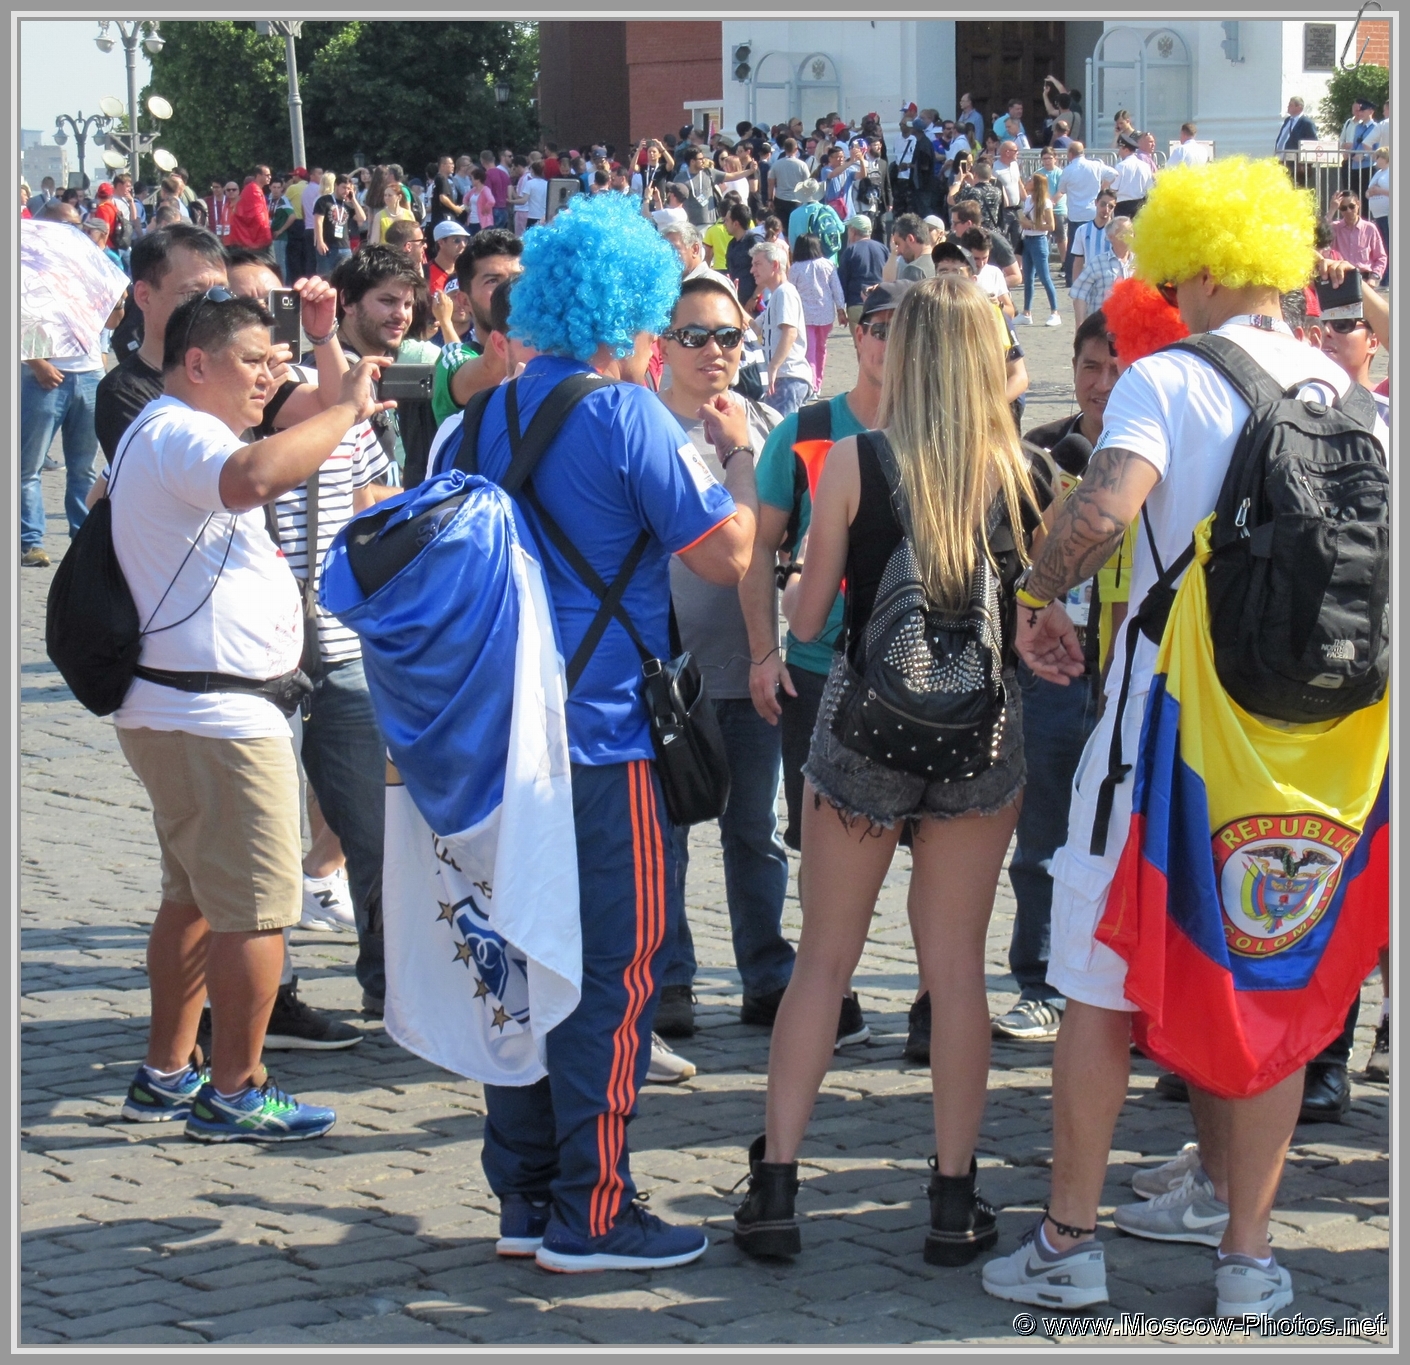 Football fans in Moscow during the 2018 FIFA World Cup